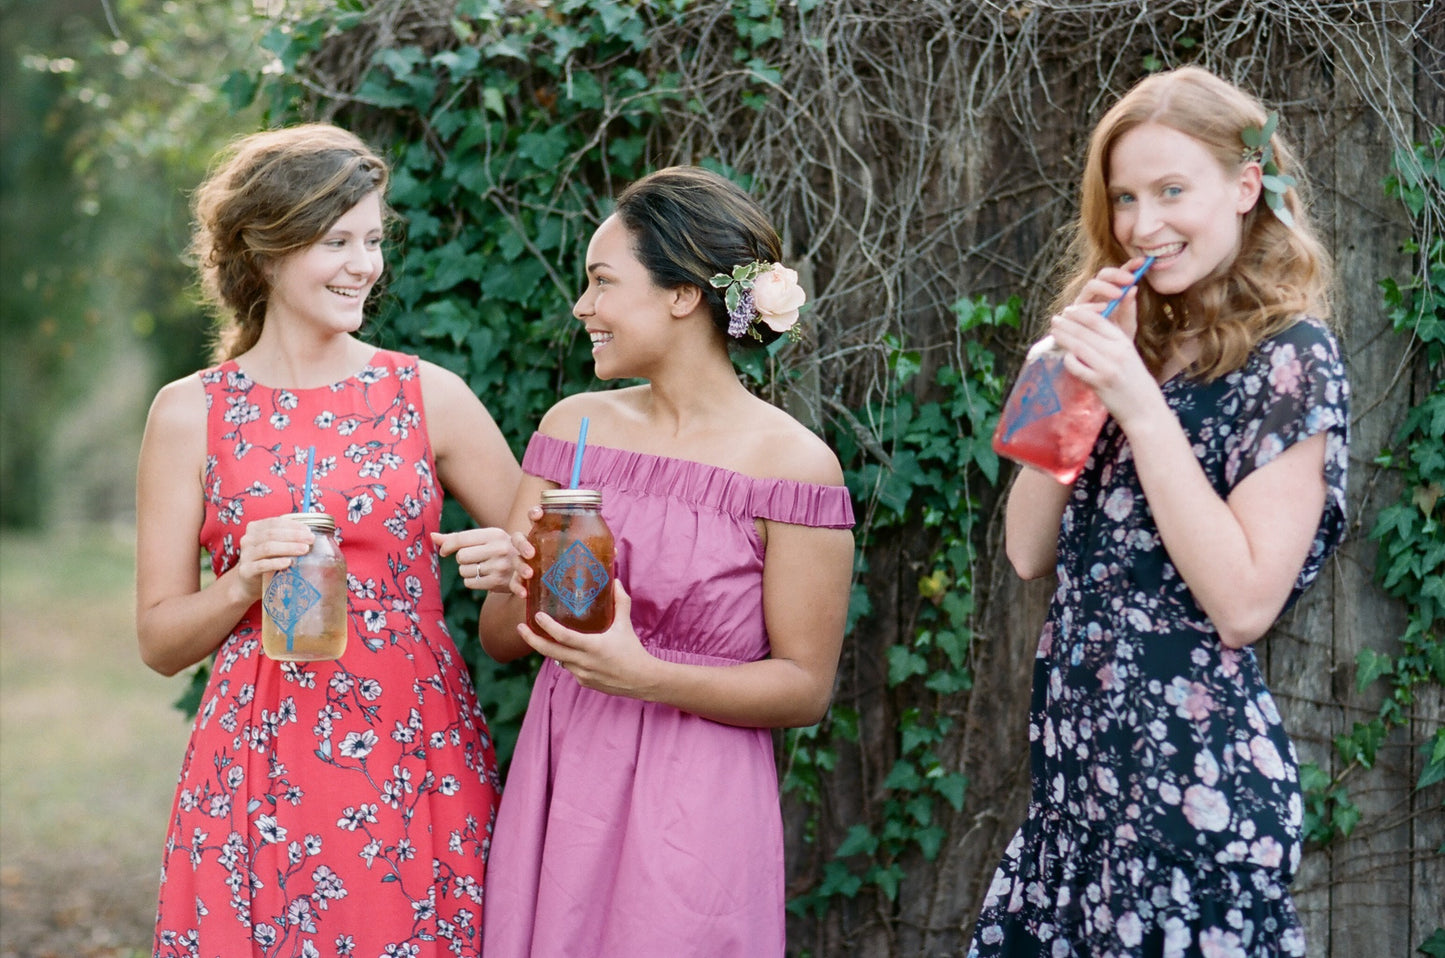 Three bridesmaids are standing next to each other, each holding a Signature Mason Drinking Jar - Quart Size filled with iced tea from Piper & Leaf Tea Co.